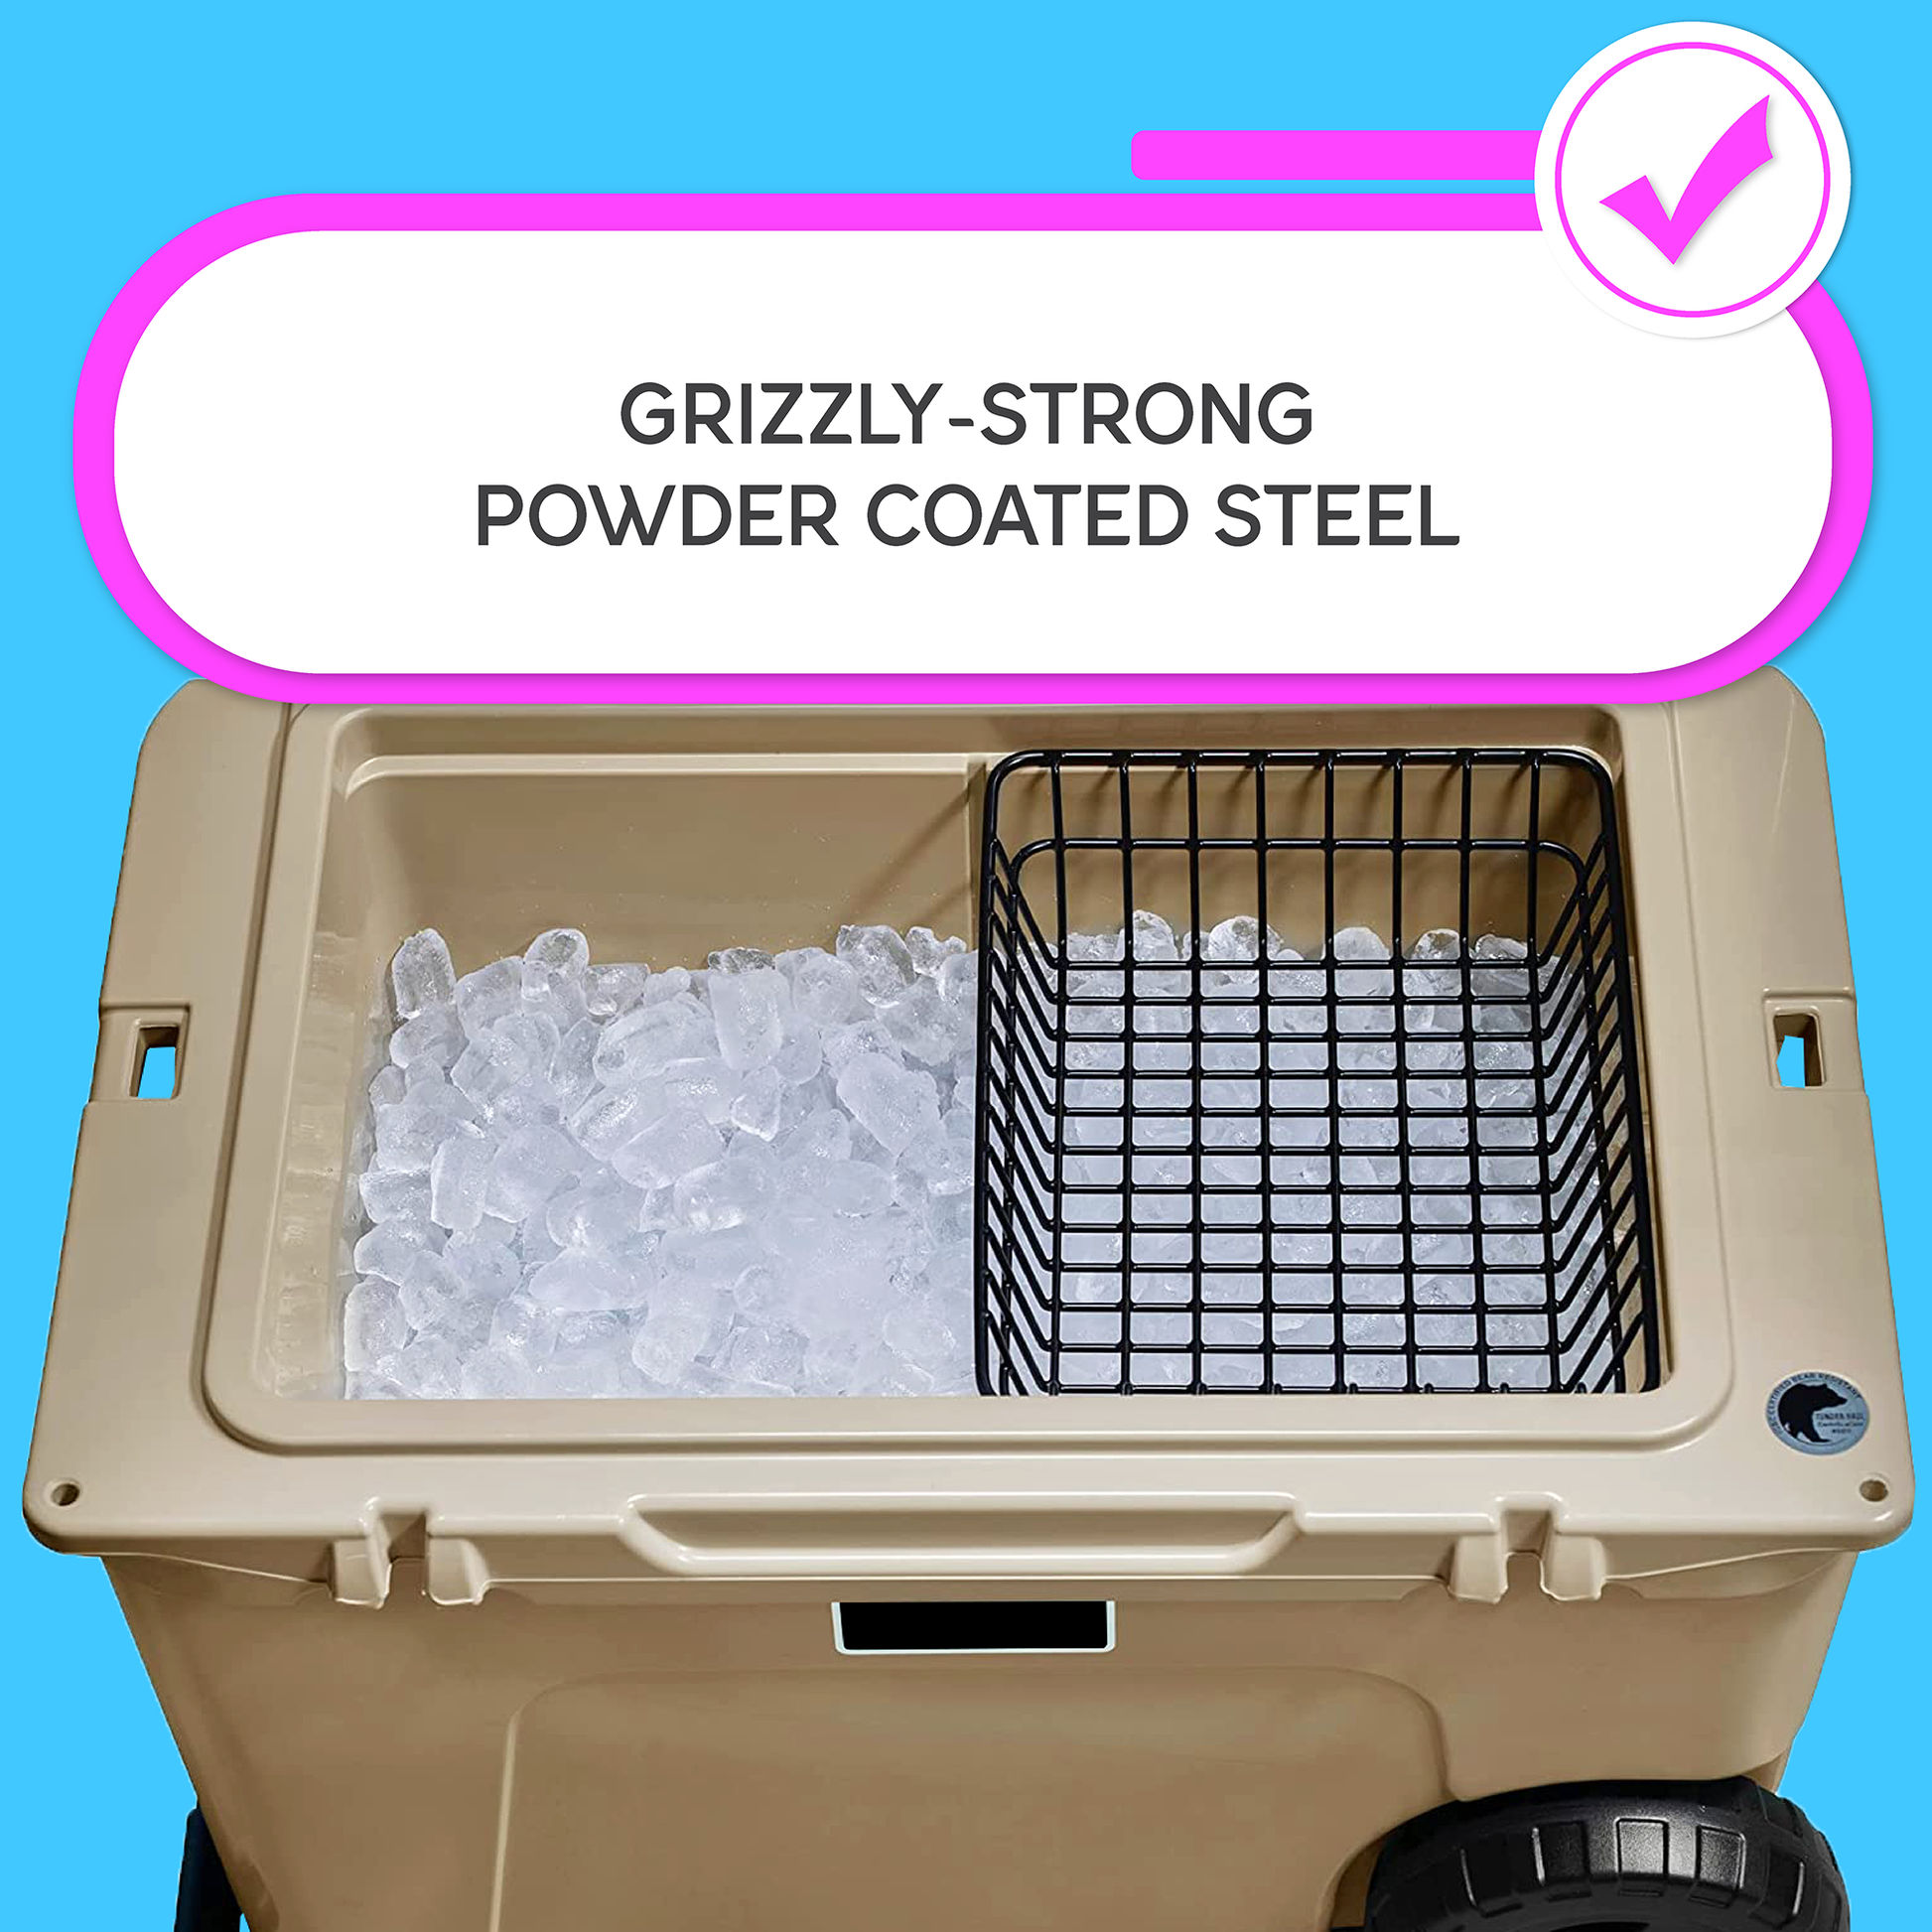  2-Pack Cooler Basket for YETI Tundra Haul, Double Cooler Rack  for Double Storage, Dry-Goods Basket for YETI Wheeled Coolers (Cooler NOT  Included) (Yeti Wire Basket Coated) : Sports & Outdoors